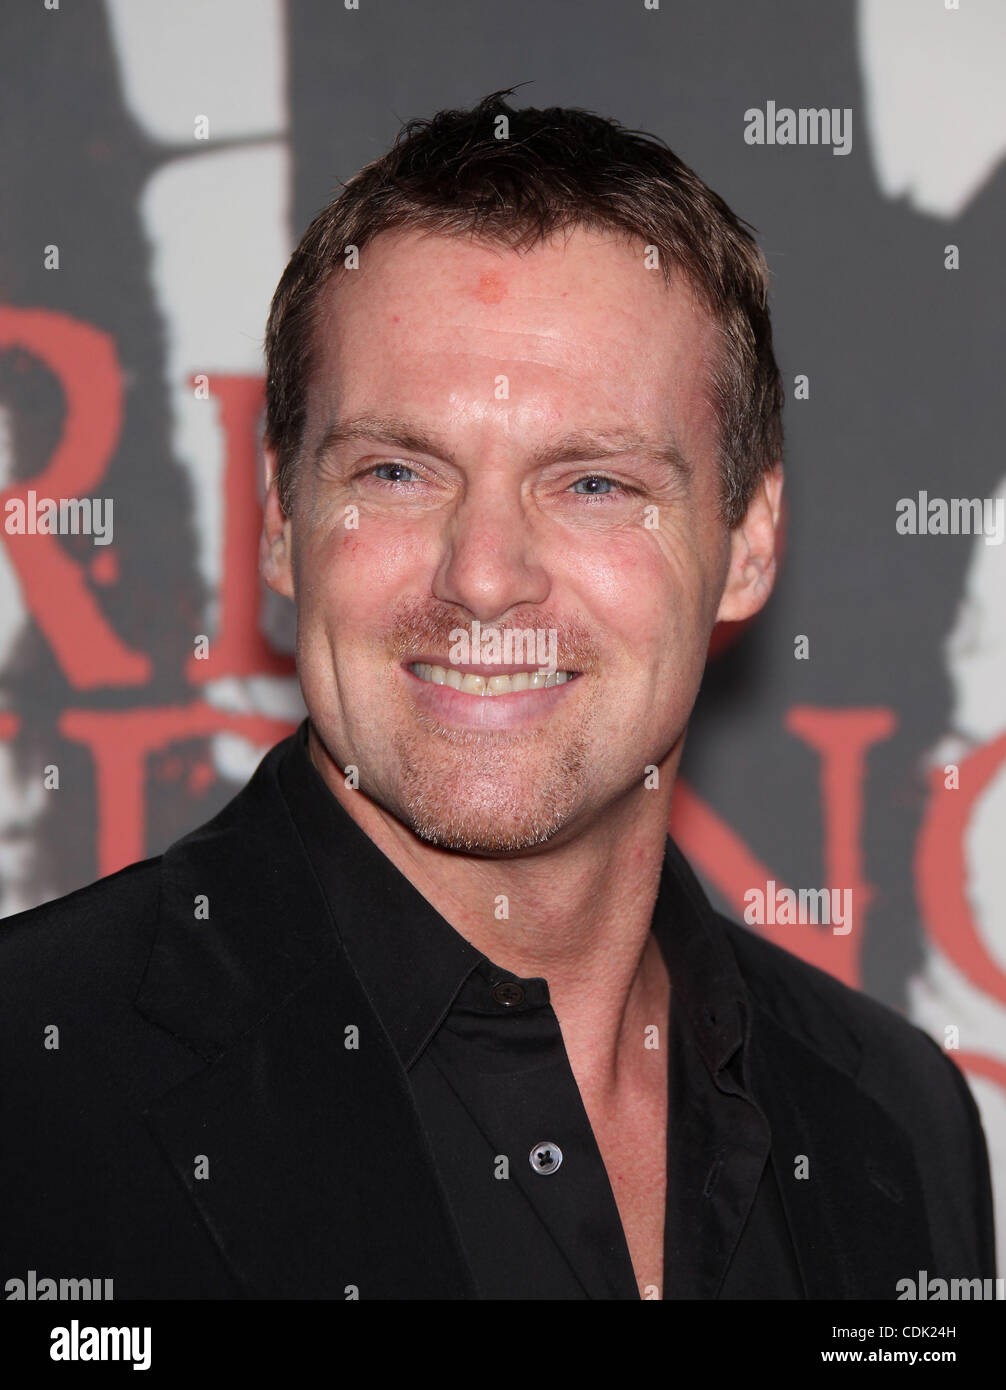 Mar. 7, 2011 - Hollywood, California, U.S. - MICHAEL SHANKS arrives for the premiere of the film 'Red Riding Hood' at the Chinese theater. (Credit Image: © Lisa O'Connor/ZUMAPRESS.com) Stock Photo